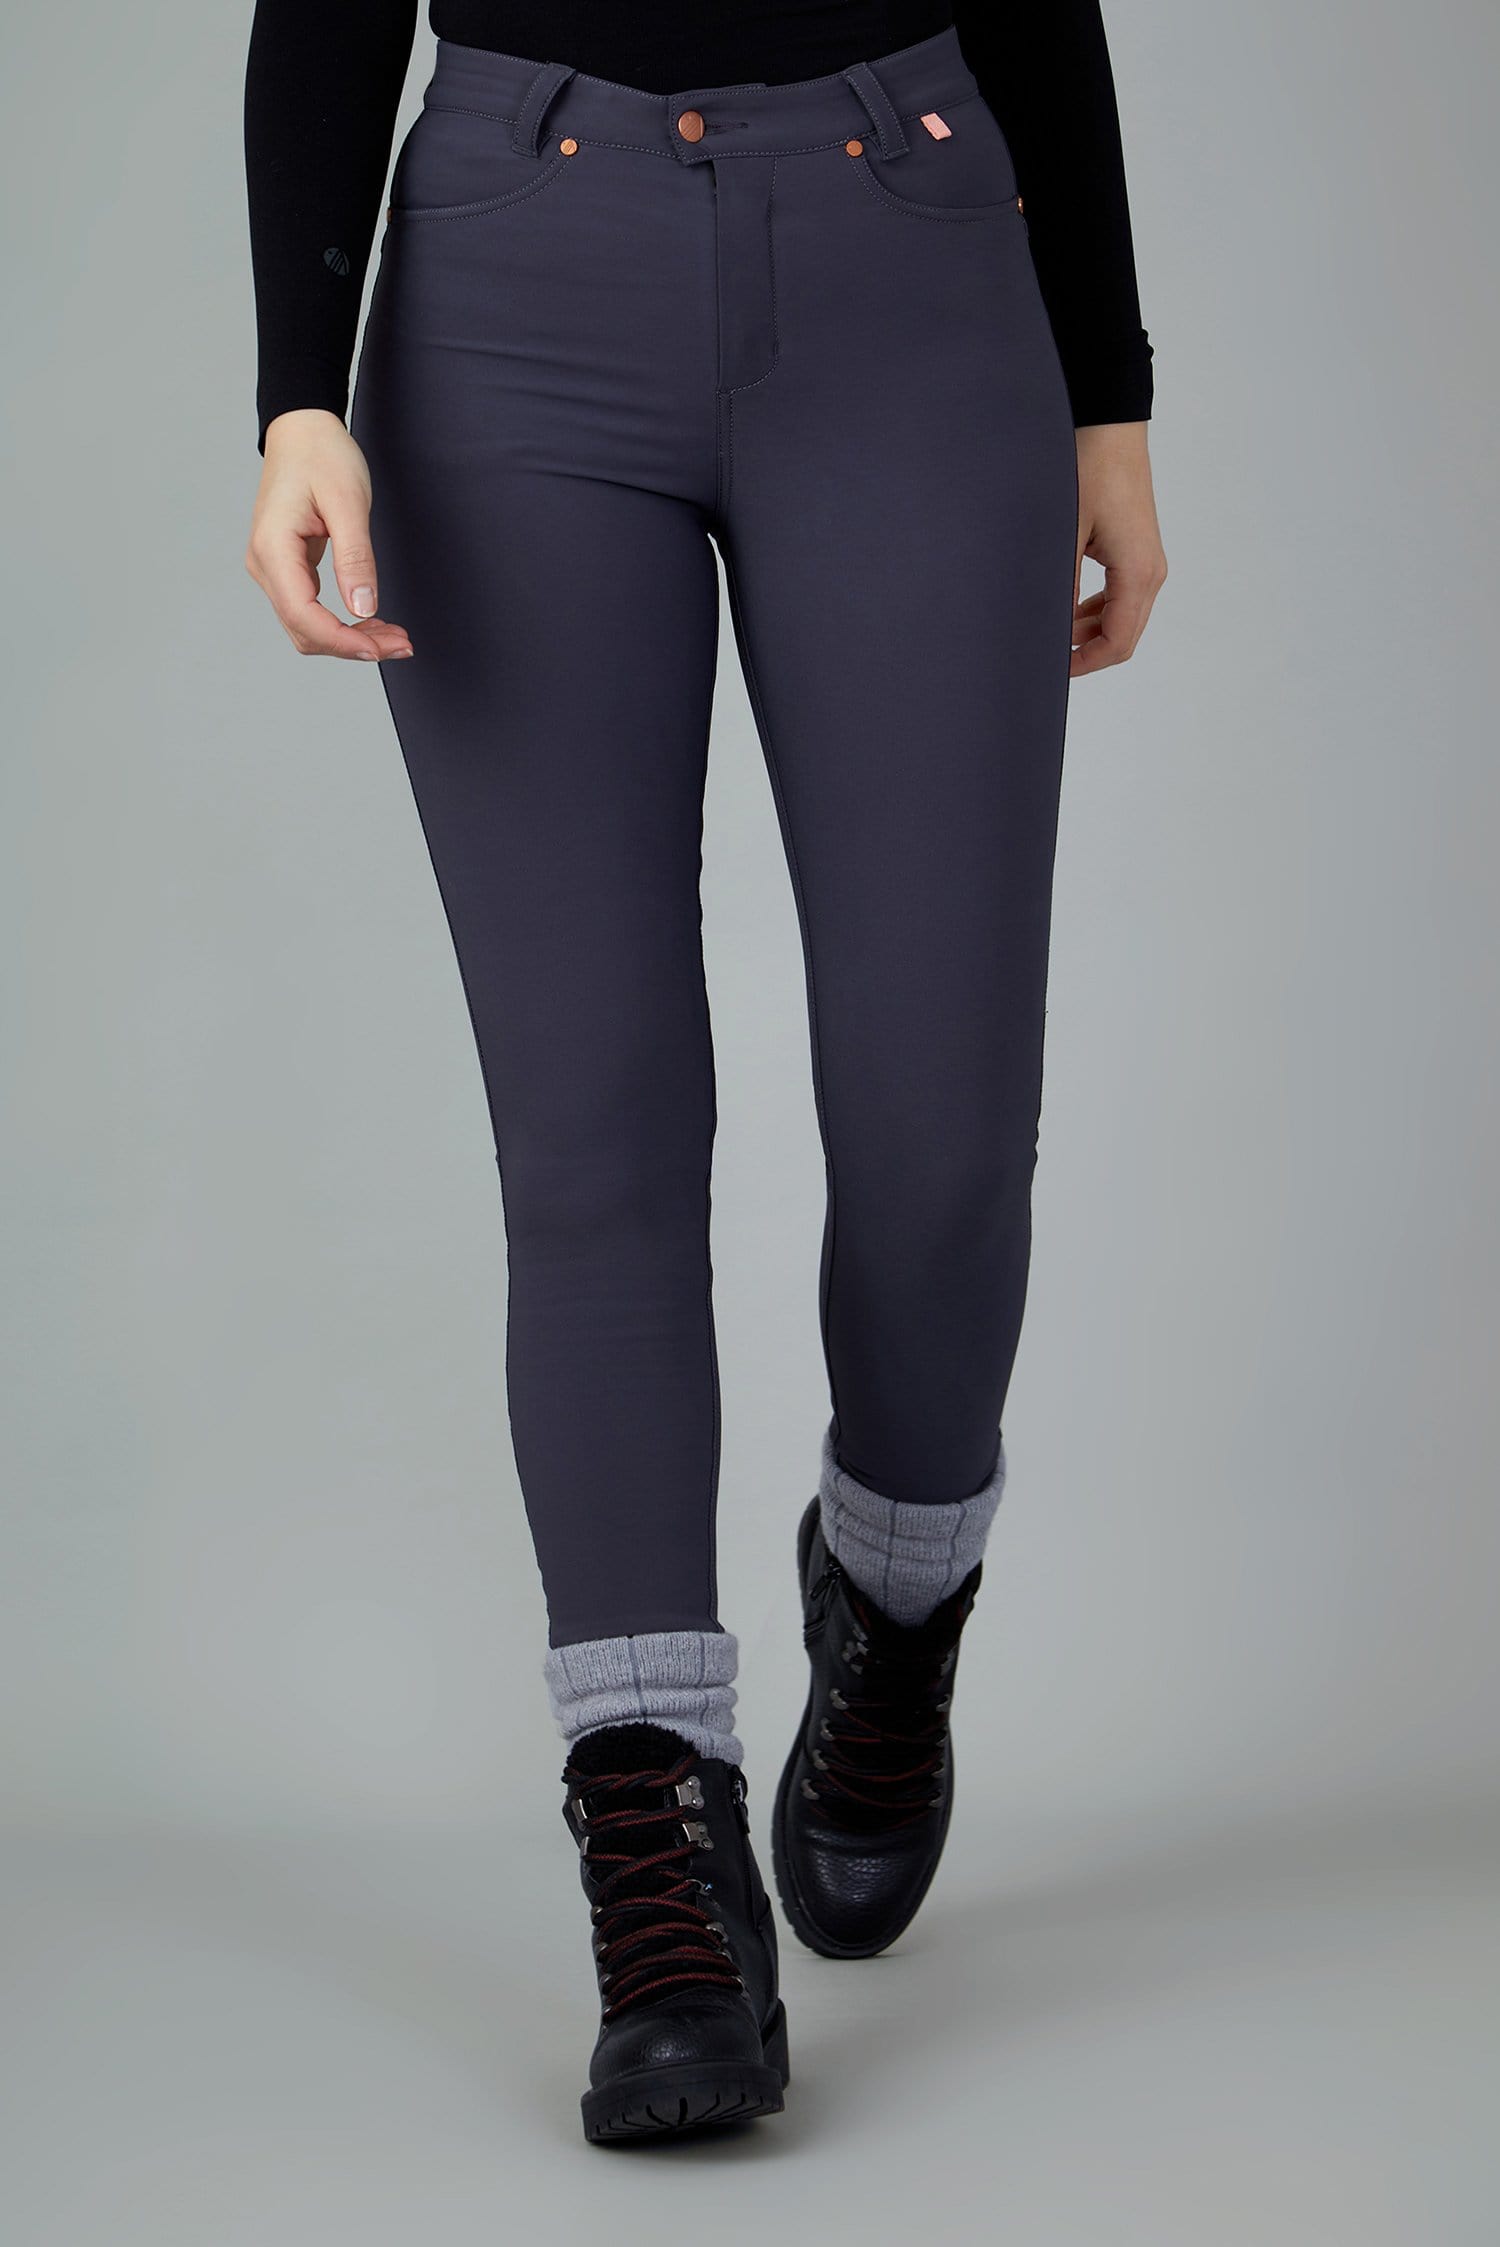 The Aventurite Stretch Skinny Outdoor Trousers - Obsidian - 26r / Uk8 - Womens - Acai Outdoorwear